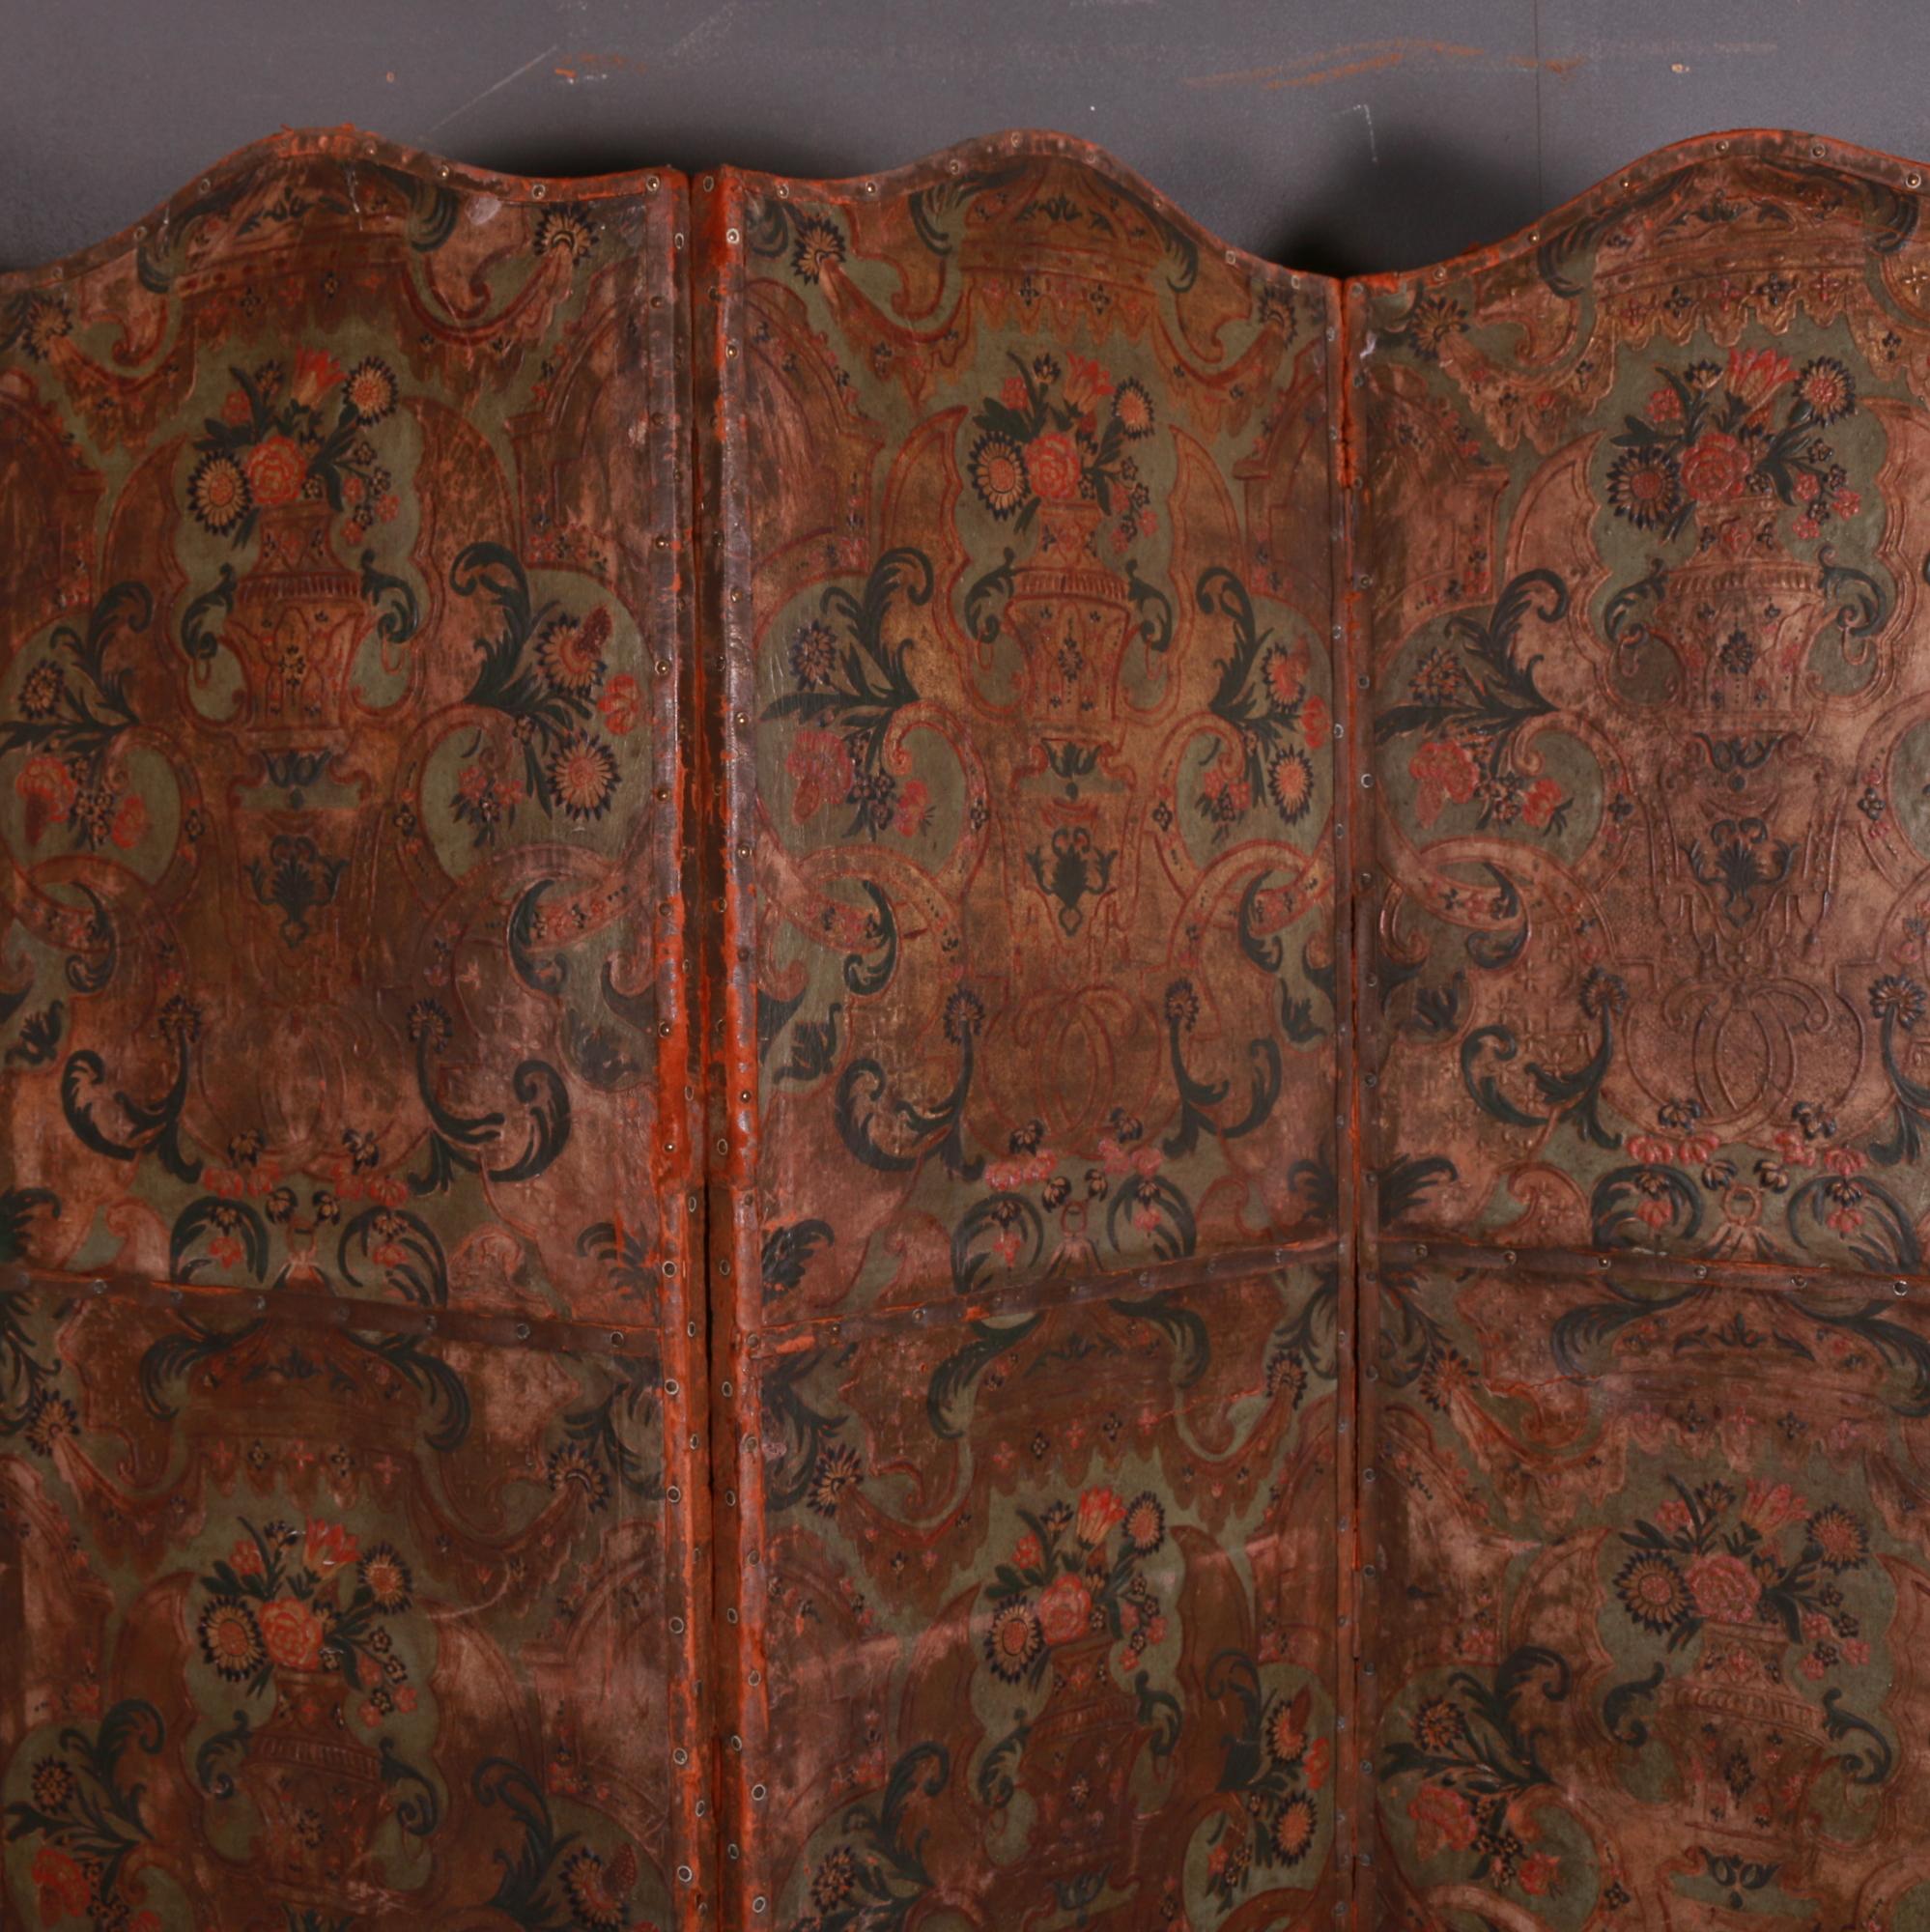 Tall 19th century Italian painted leather four fold screen. Good colors, 1820.

Dimensions
89 inches (226 cms) wide
1 inches (3 cms) deep
78.5 inches (199 cms) high.